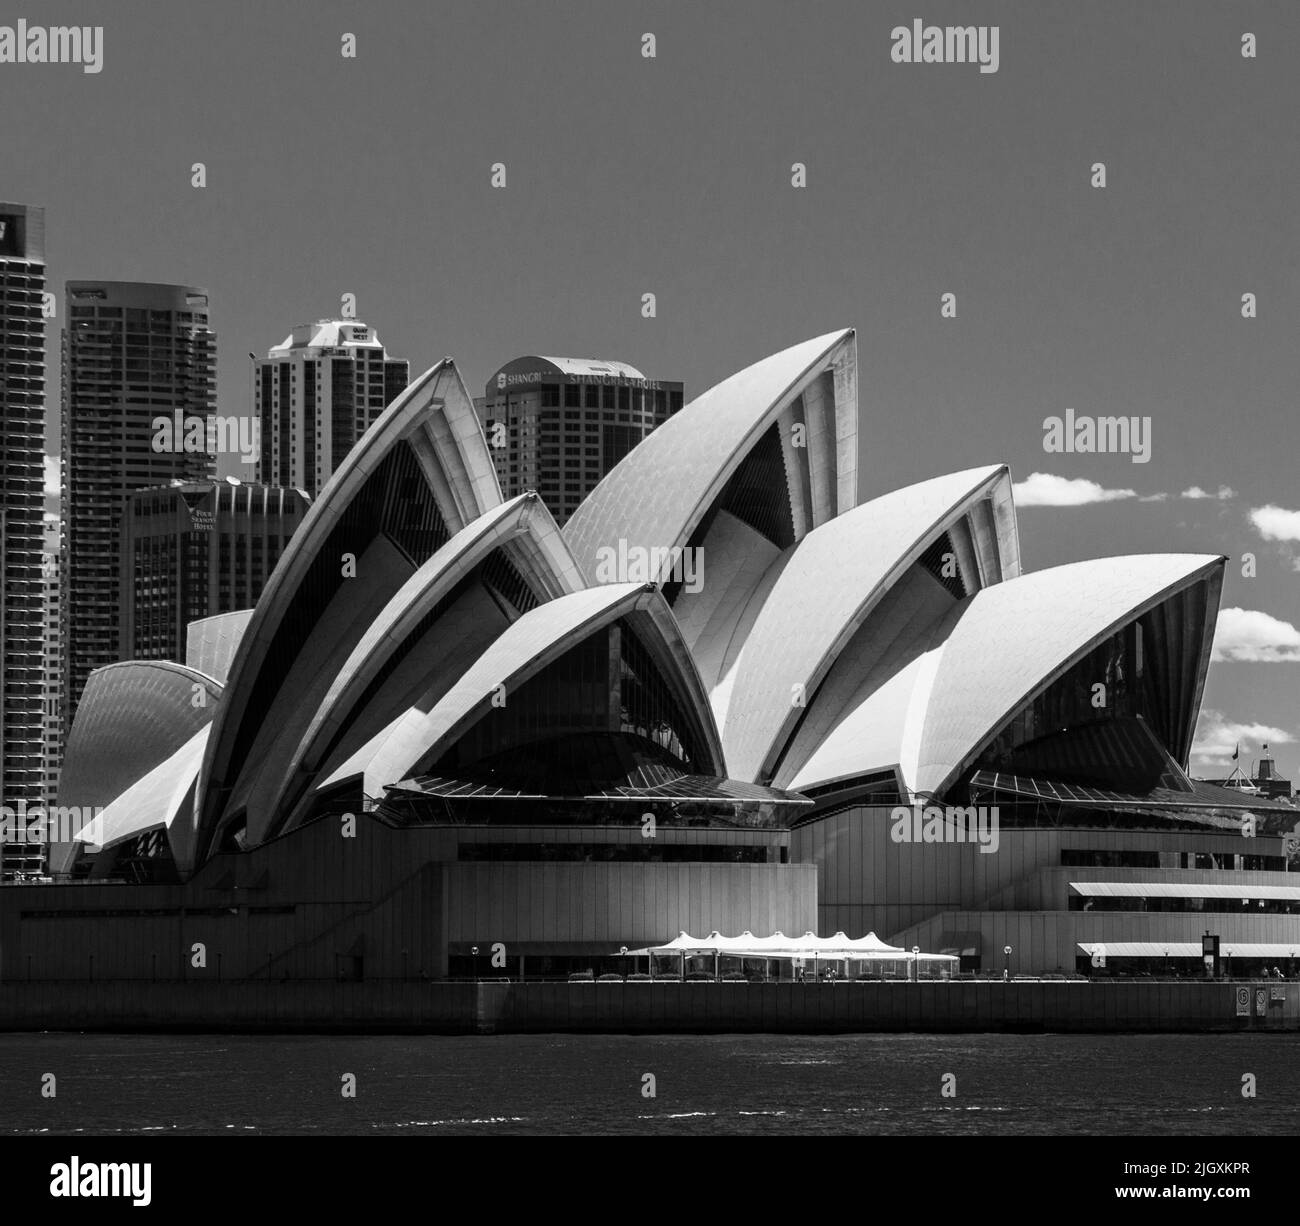 Various angles of the Sydney Opera House showing the unique tiling and architecture. Stock Photo